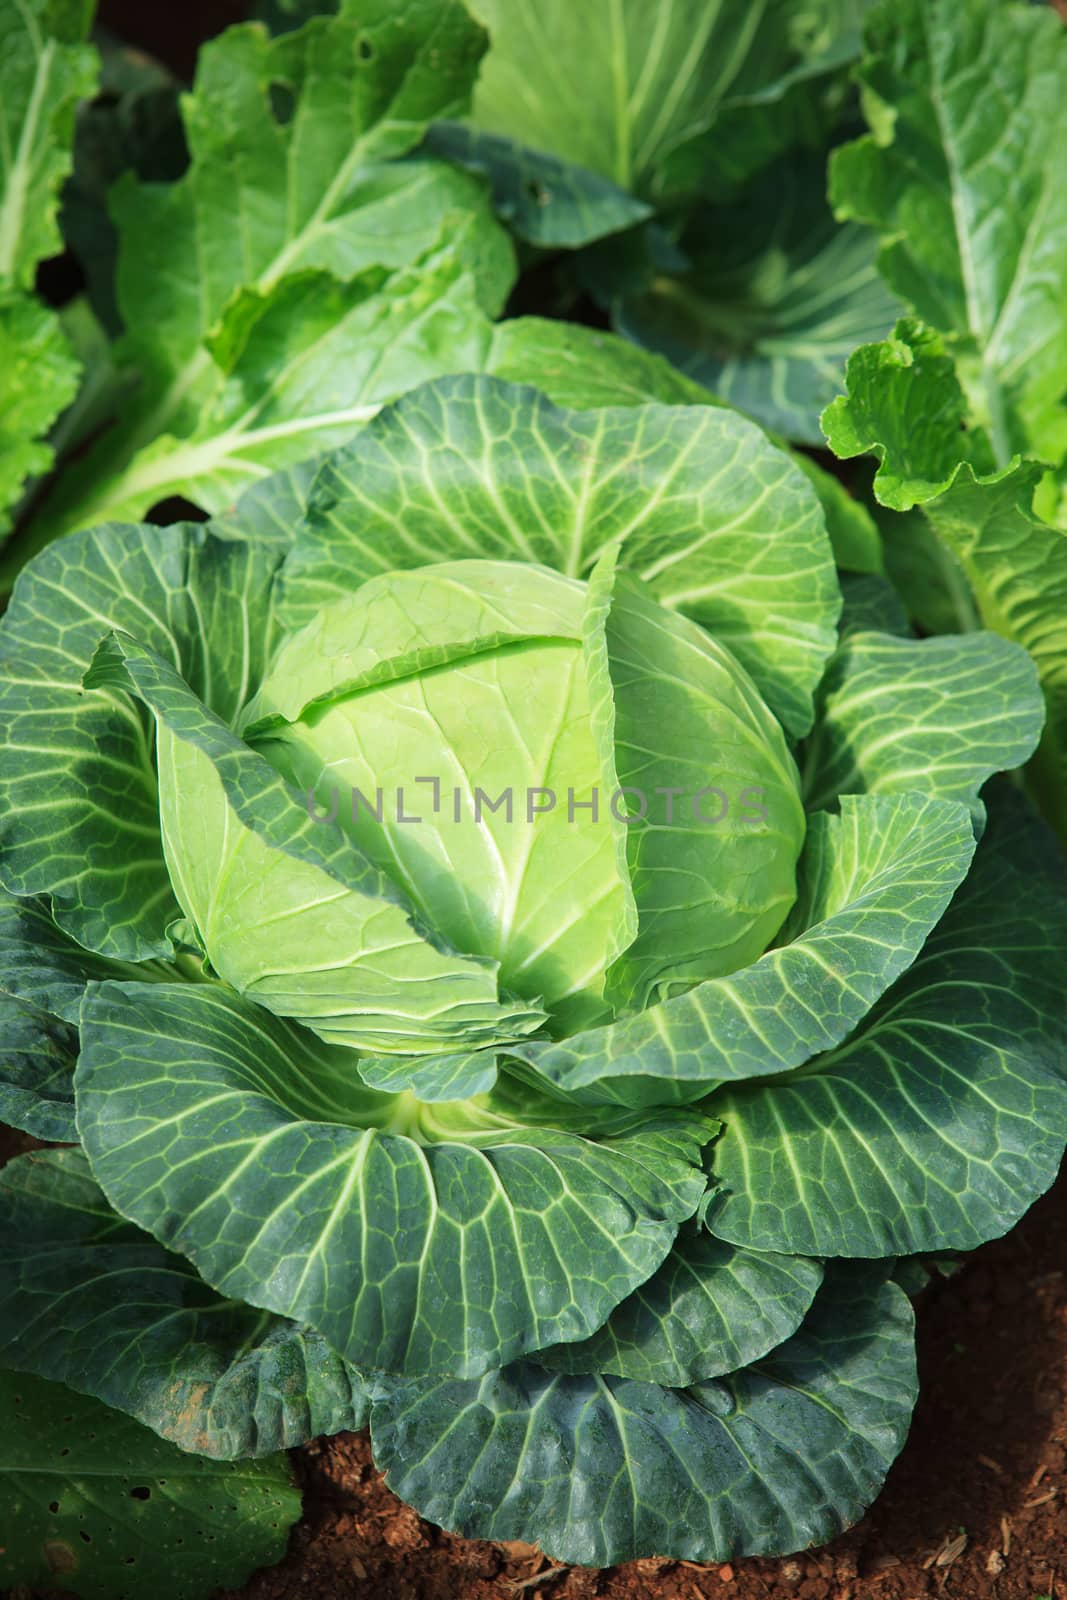 close up green fresh cabbage leaves in organic vegetable plantation green house 